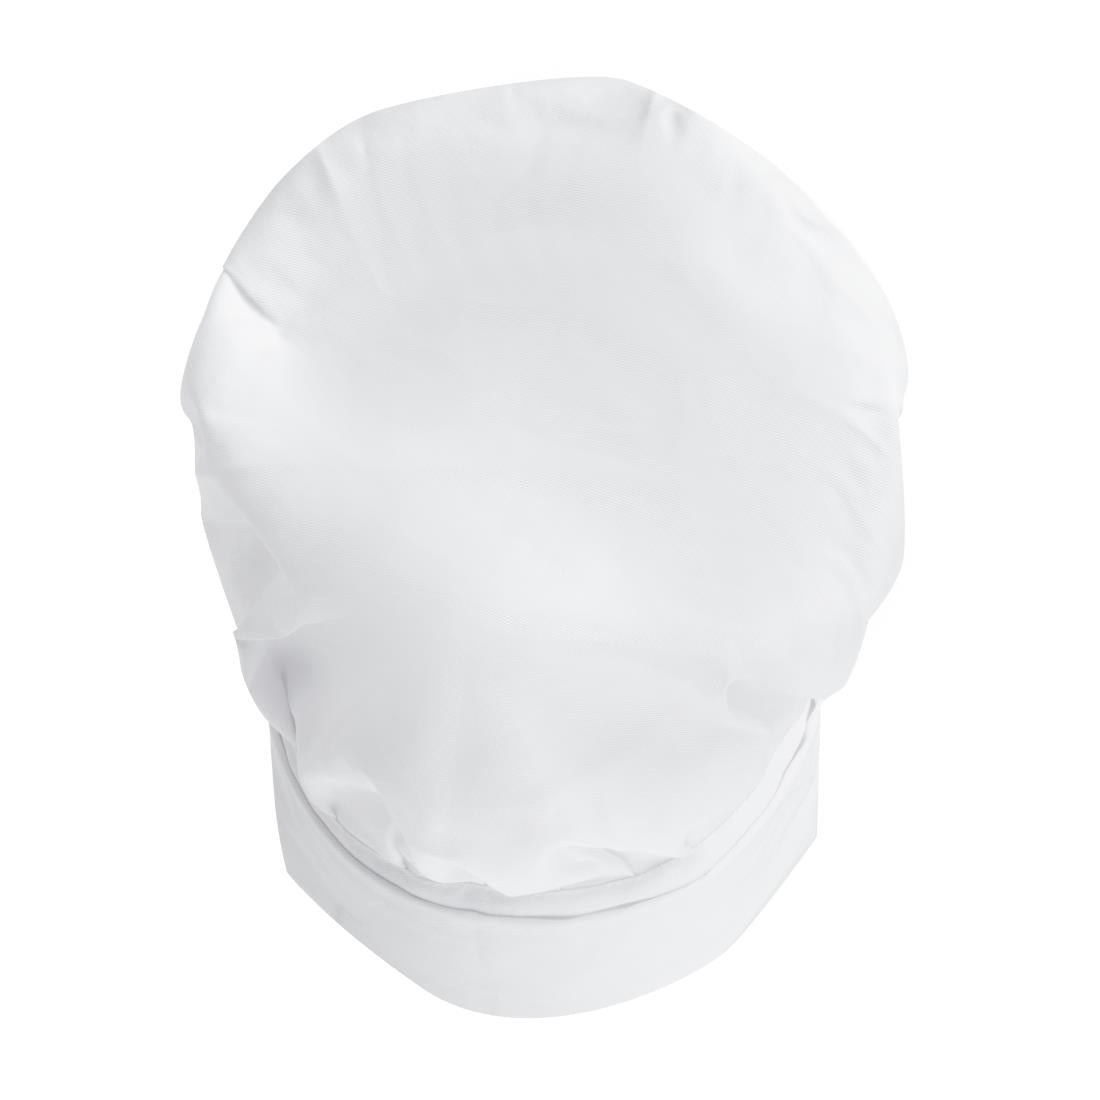 A200-M Whites Tallboy Unisex Hat M JD Catering Equipment Solutions Ltd